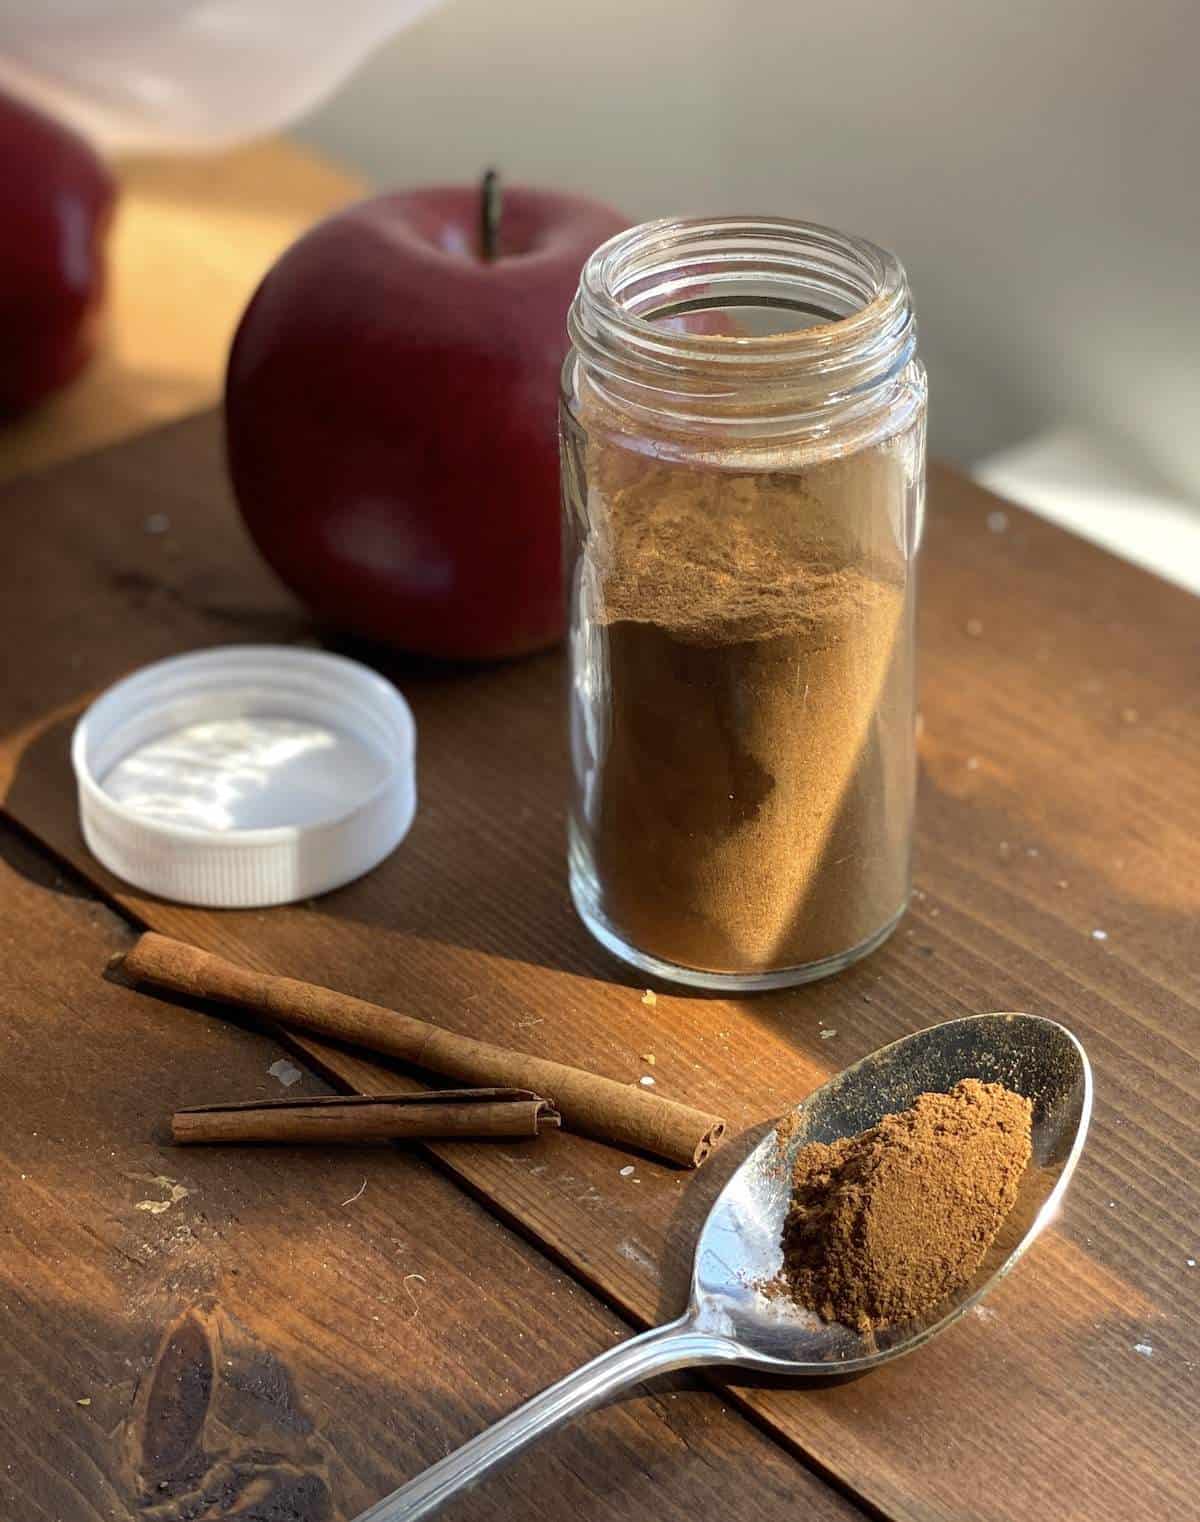 An open jar of apple pie spice mix with some on a spoon and cinnamon sticks.